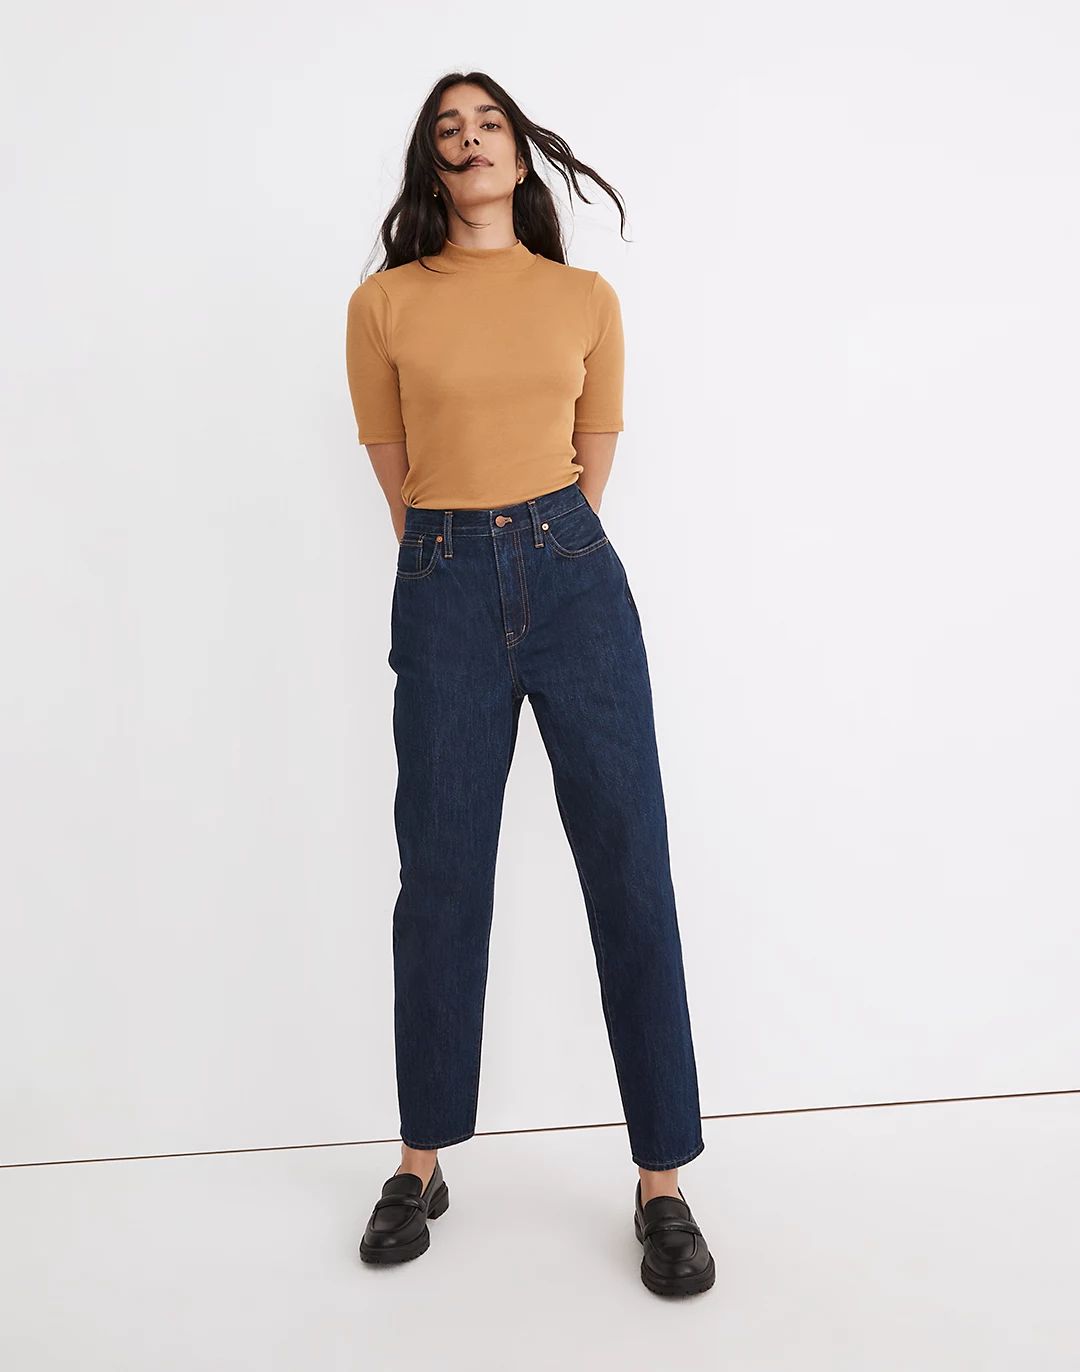 Baggy Tapered Jeans in Dressler Wash | Madewell